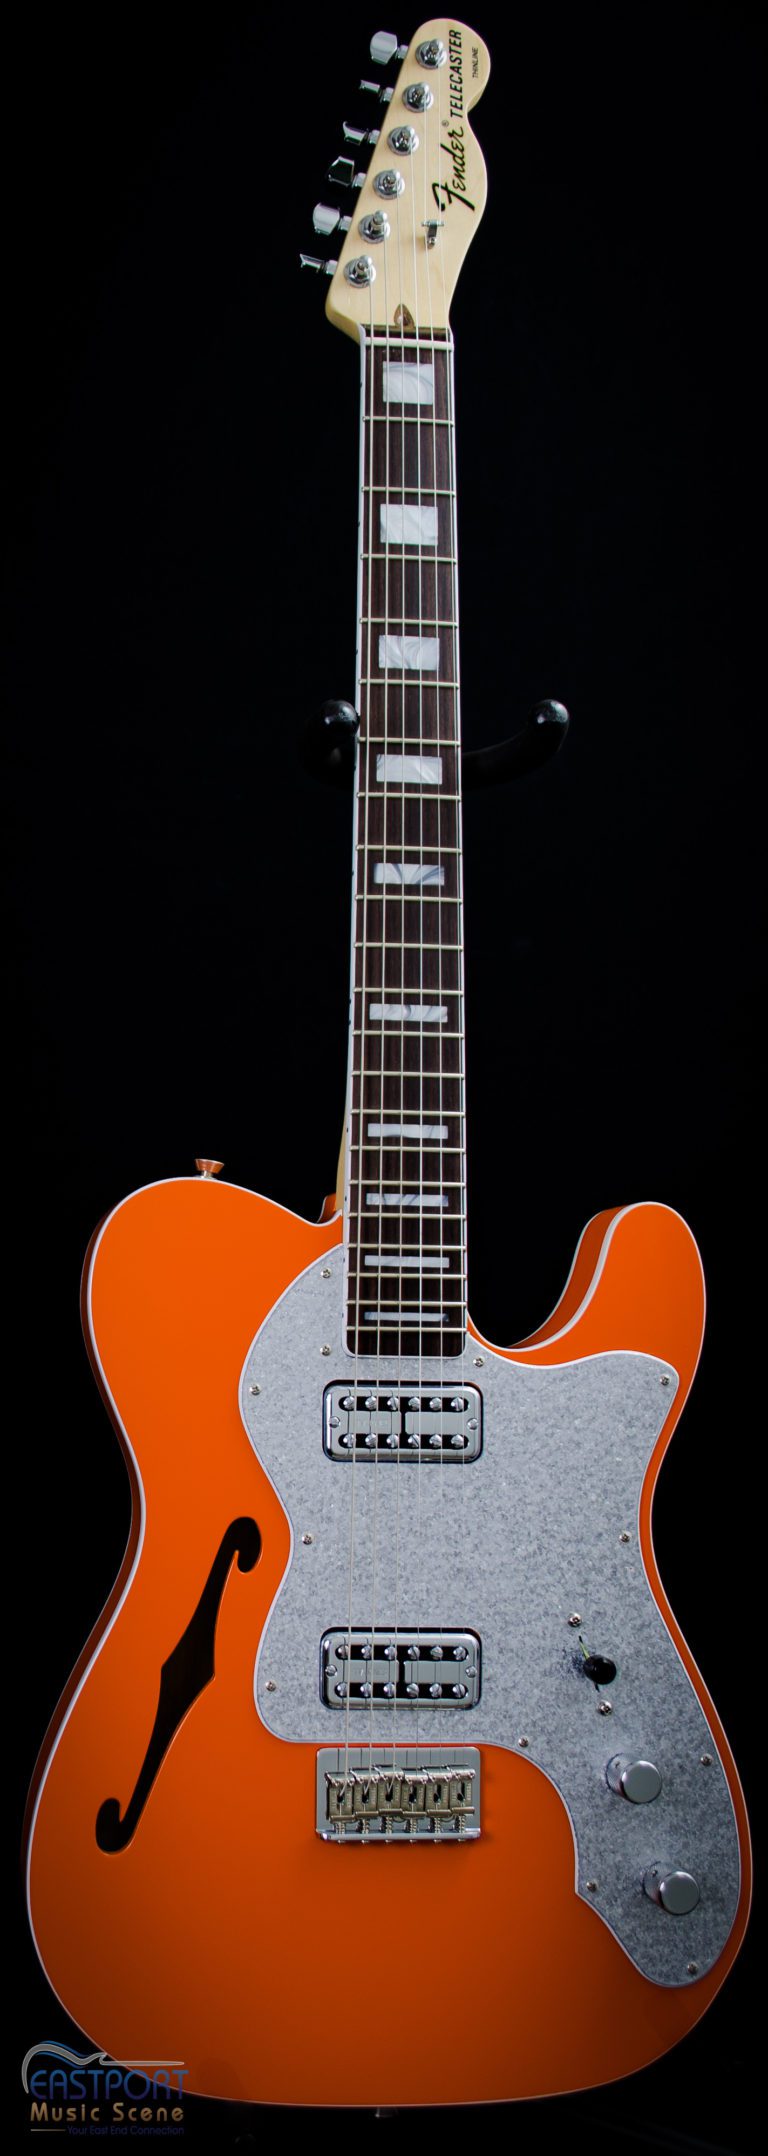 A orange electric guitar with an eight string